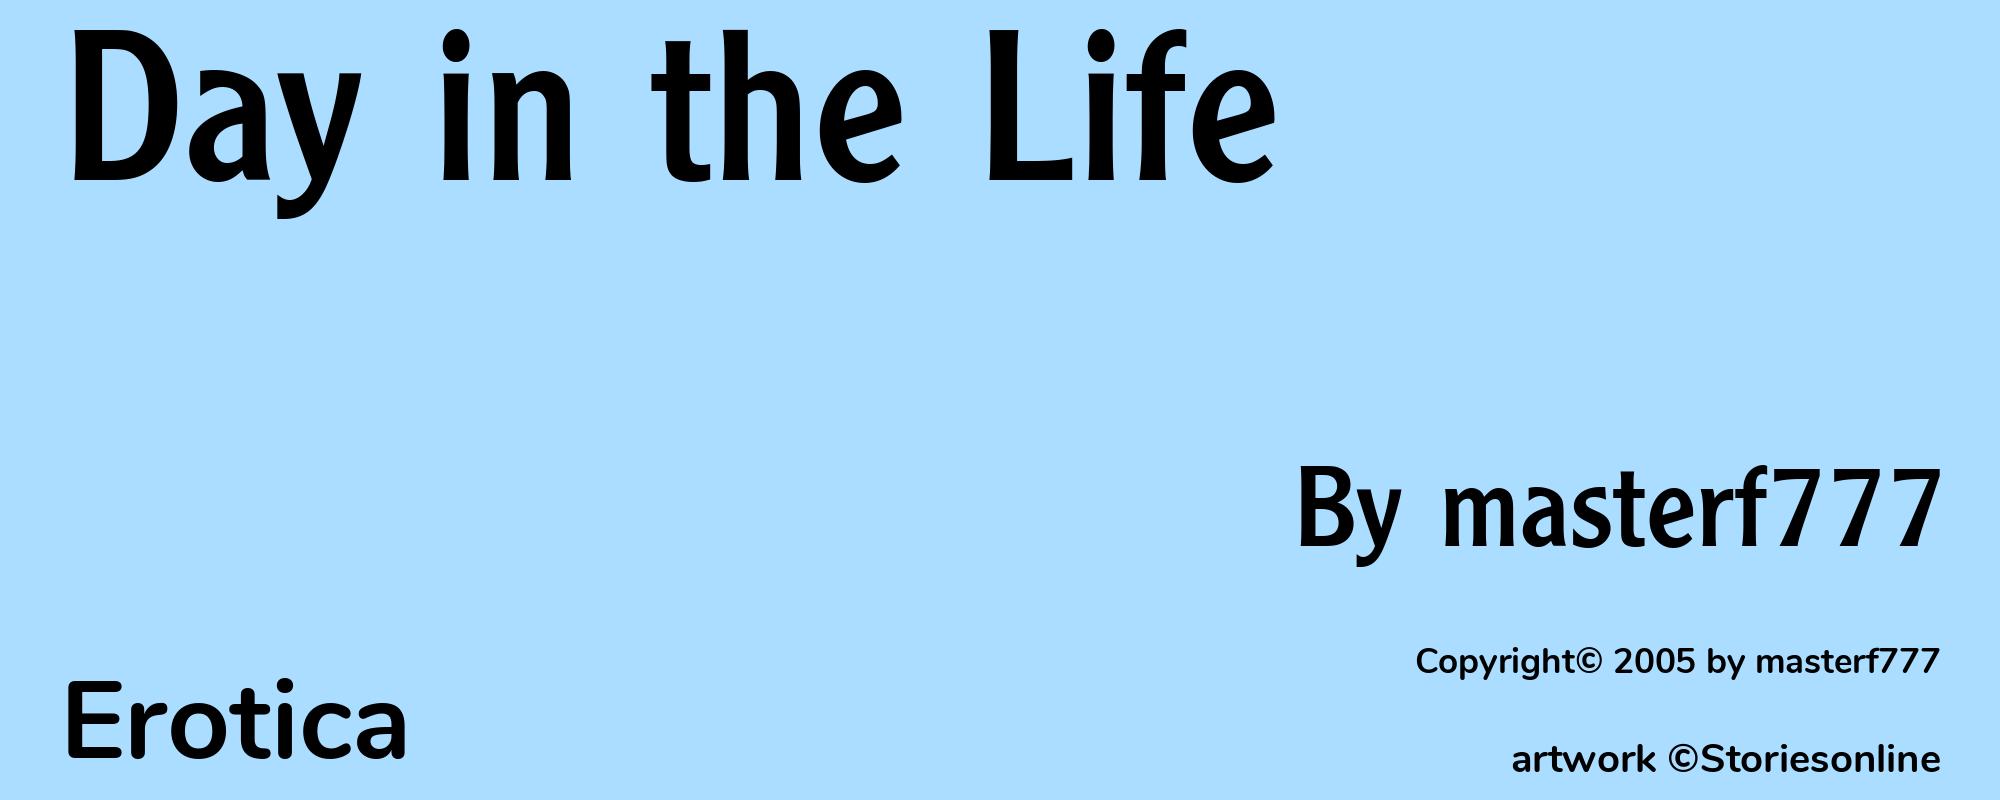 Day in the Life - Cover